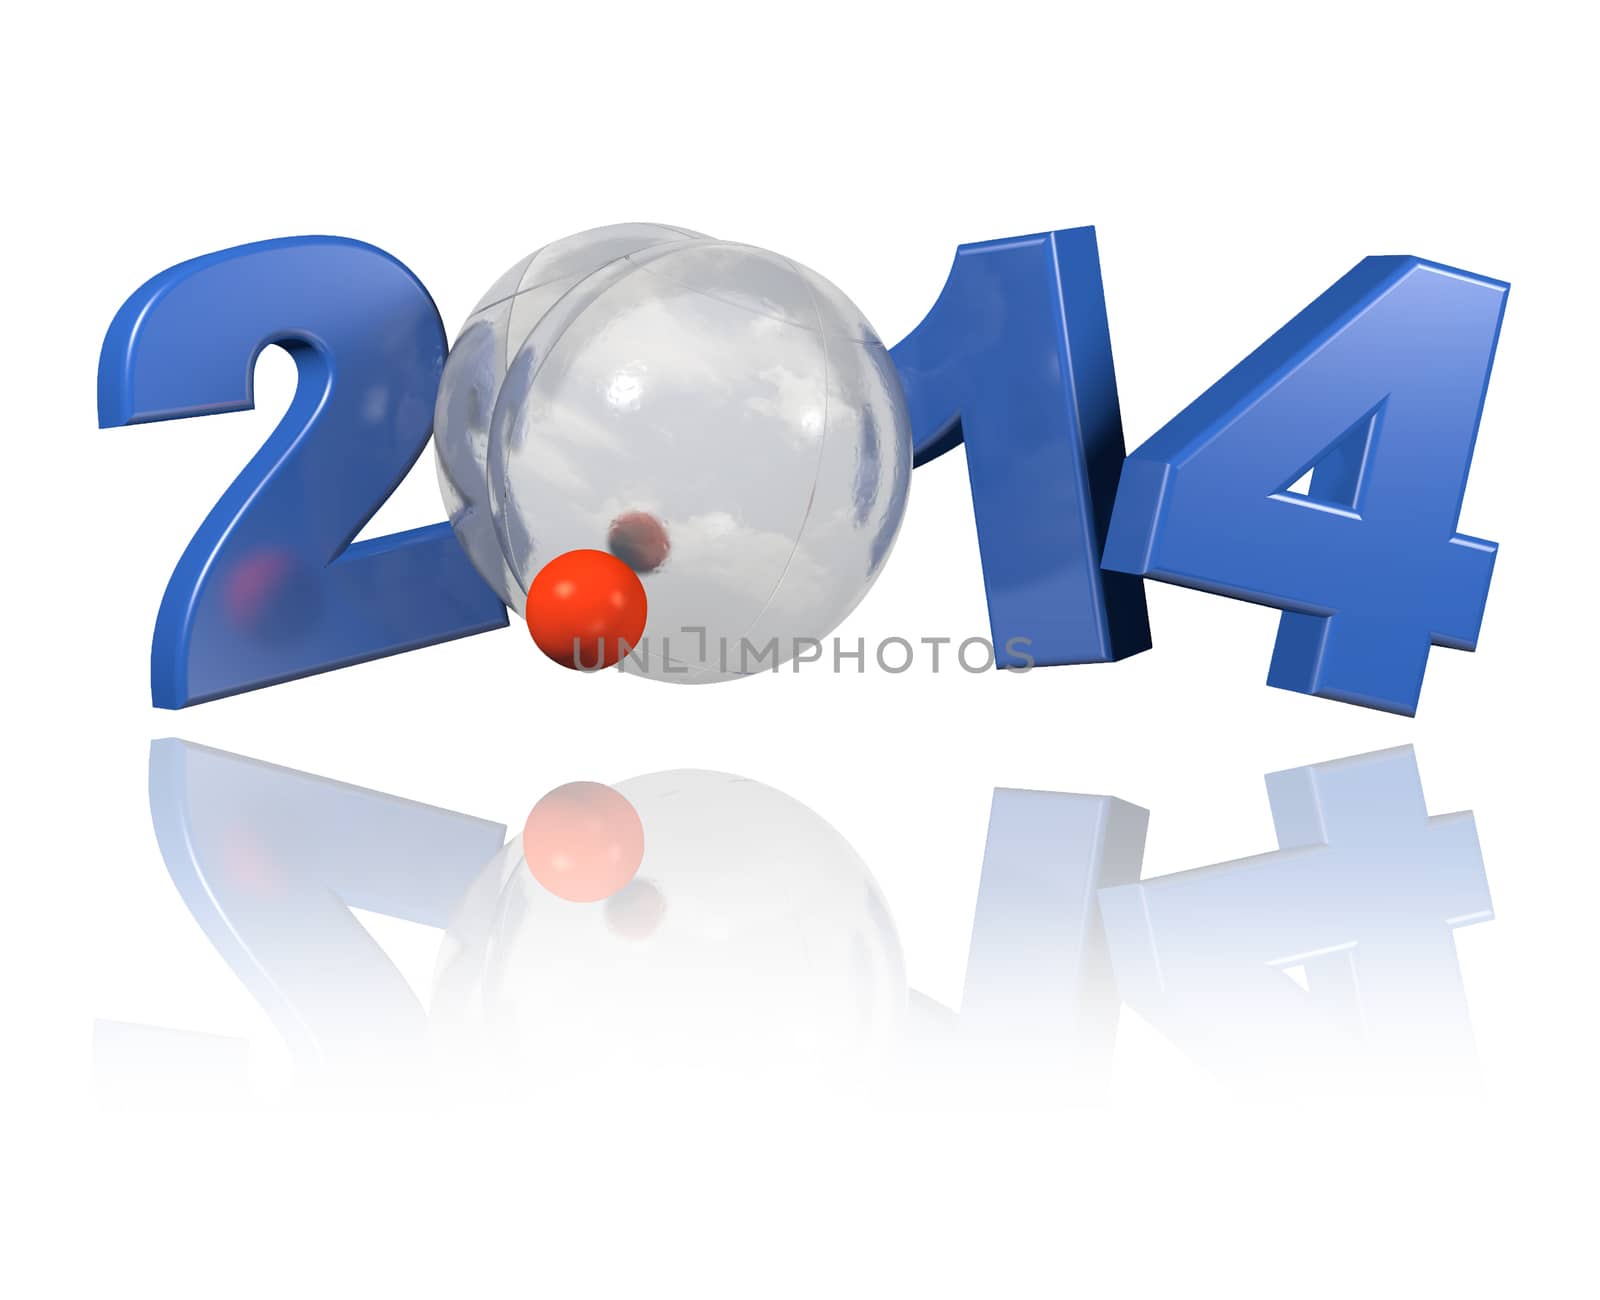 Petanque 2014 design with a white background